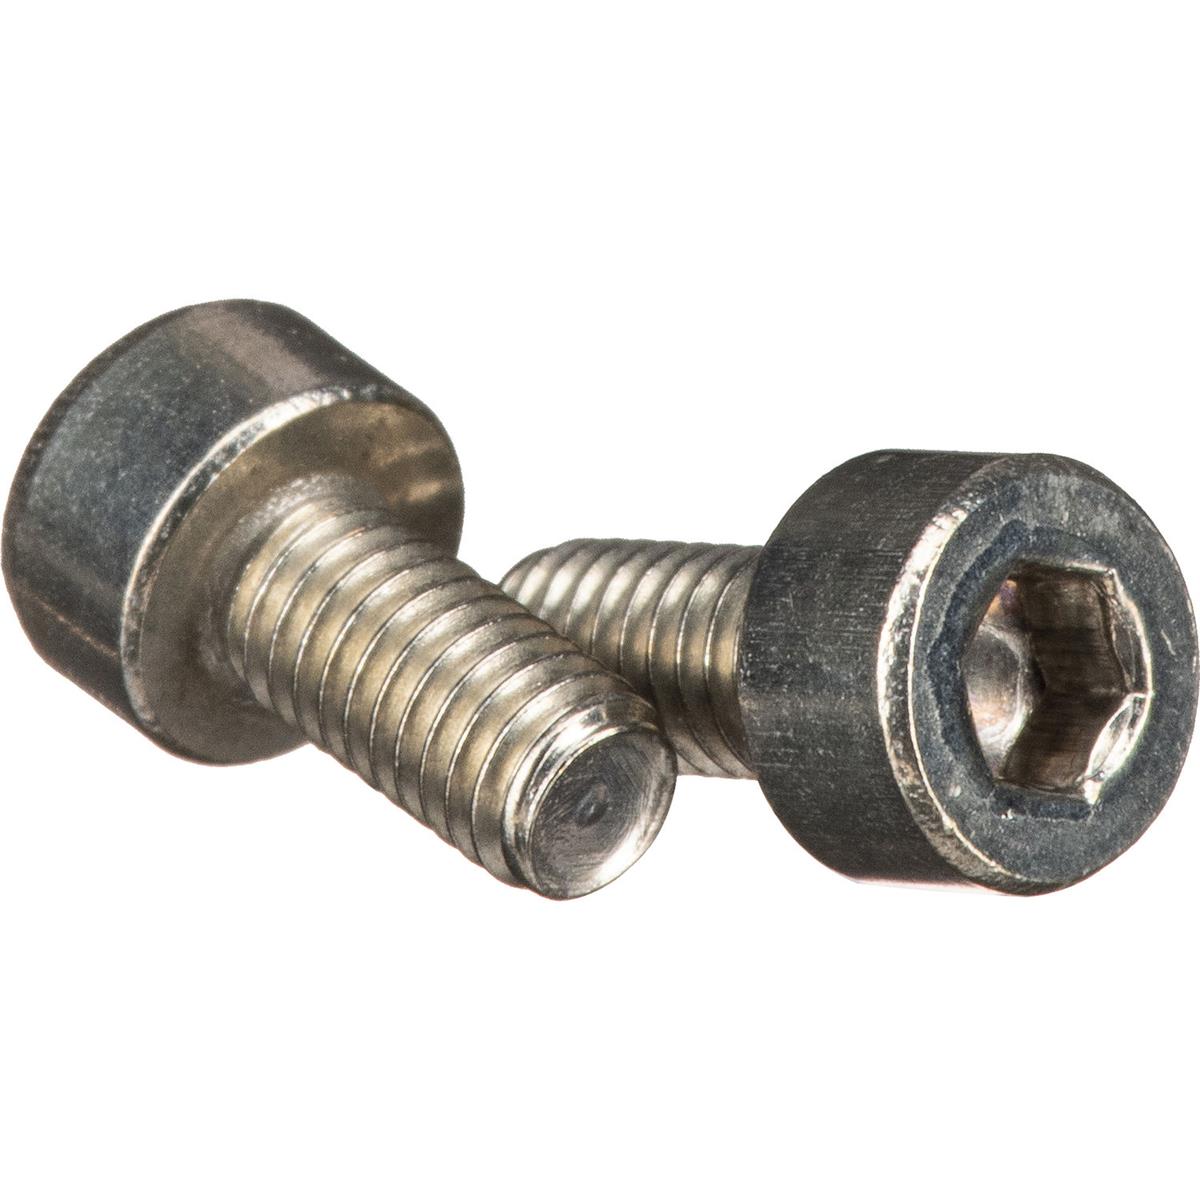 Image of Wimberley M3x6mm Safety Stop Screws